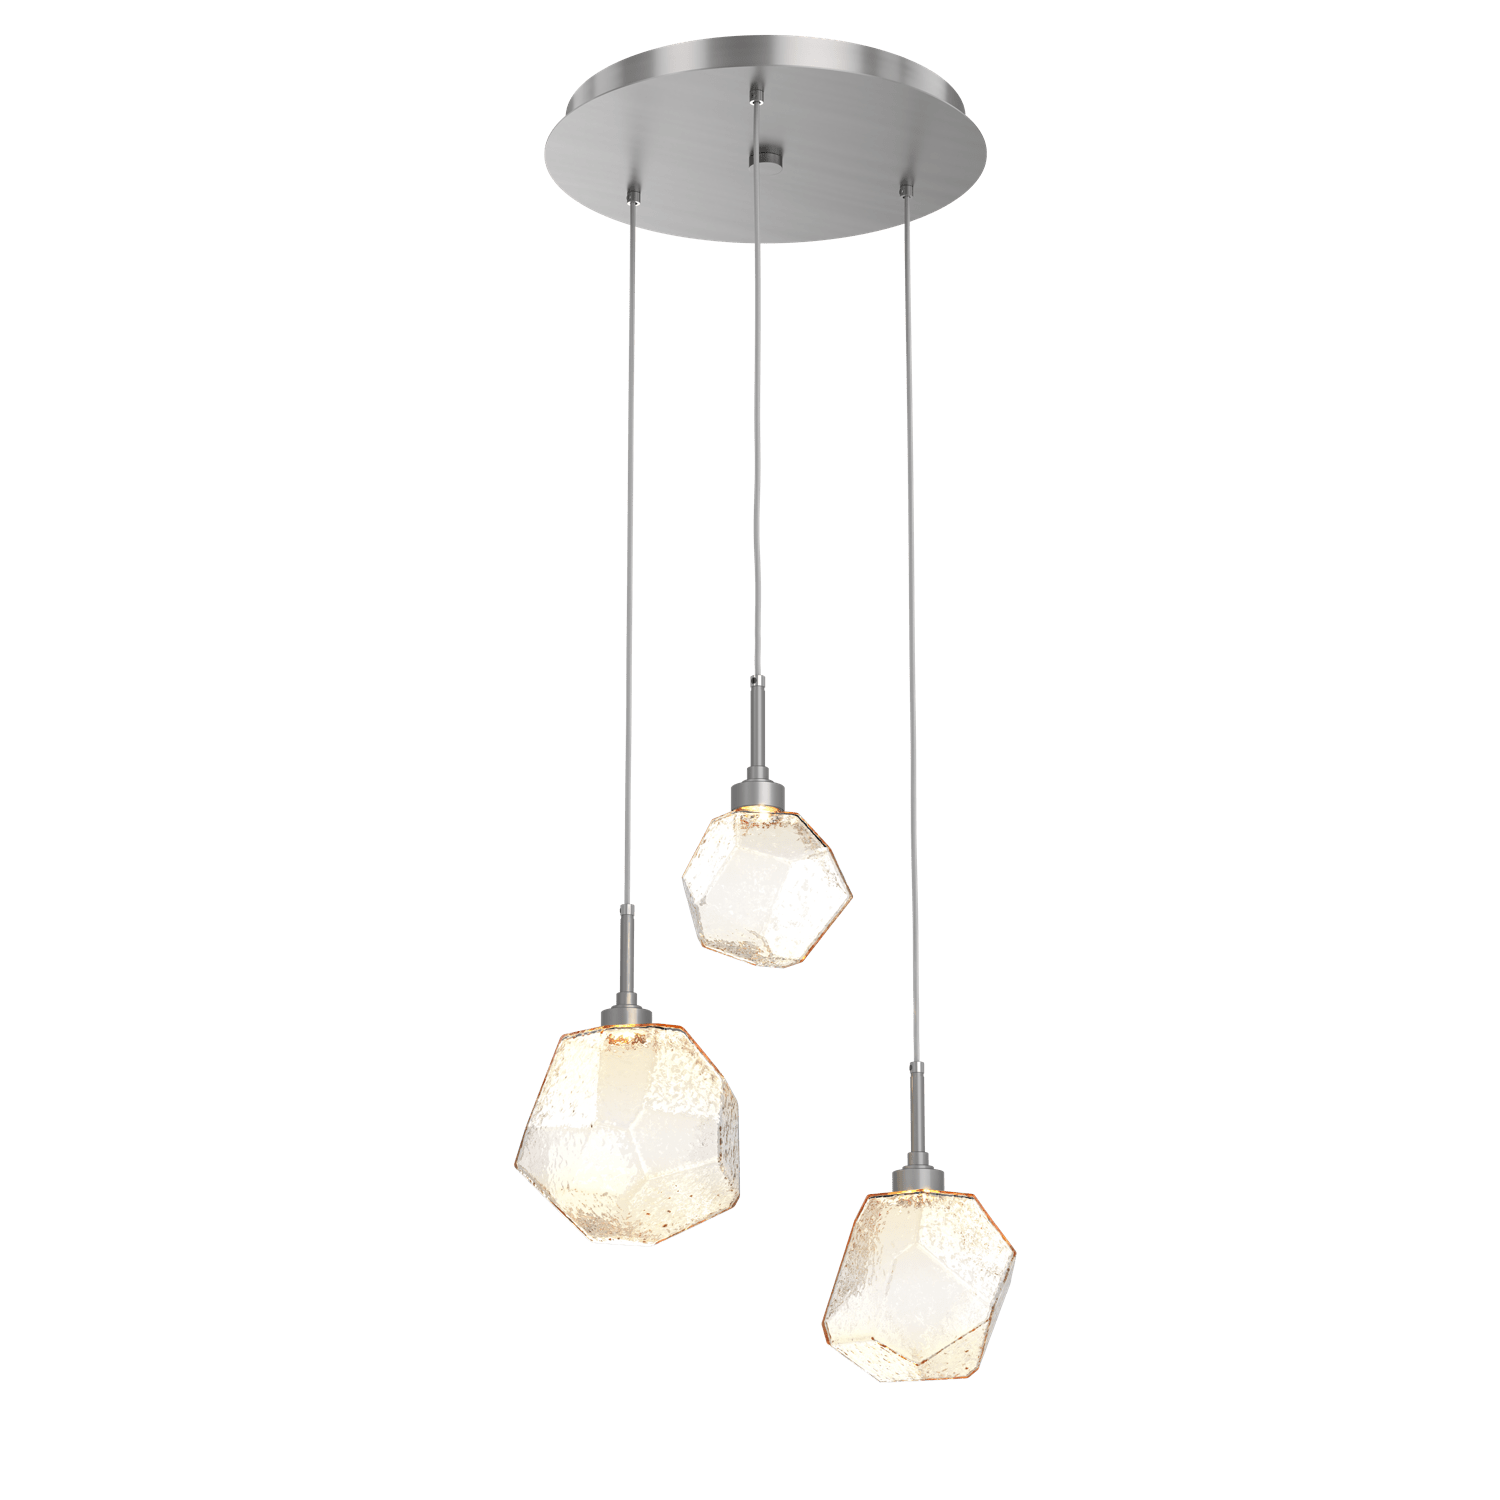 CHB0039-03-SN-A-Hammerton-Studio-Gem-3-light-round-pendant-chandelier-with-satin-nickel-finish-and-amber-blown-glass-shades-and-LED-lamping